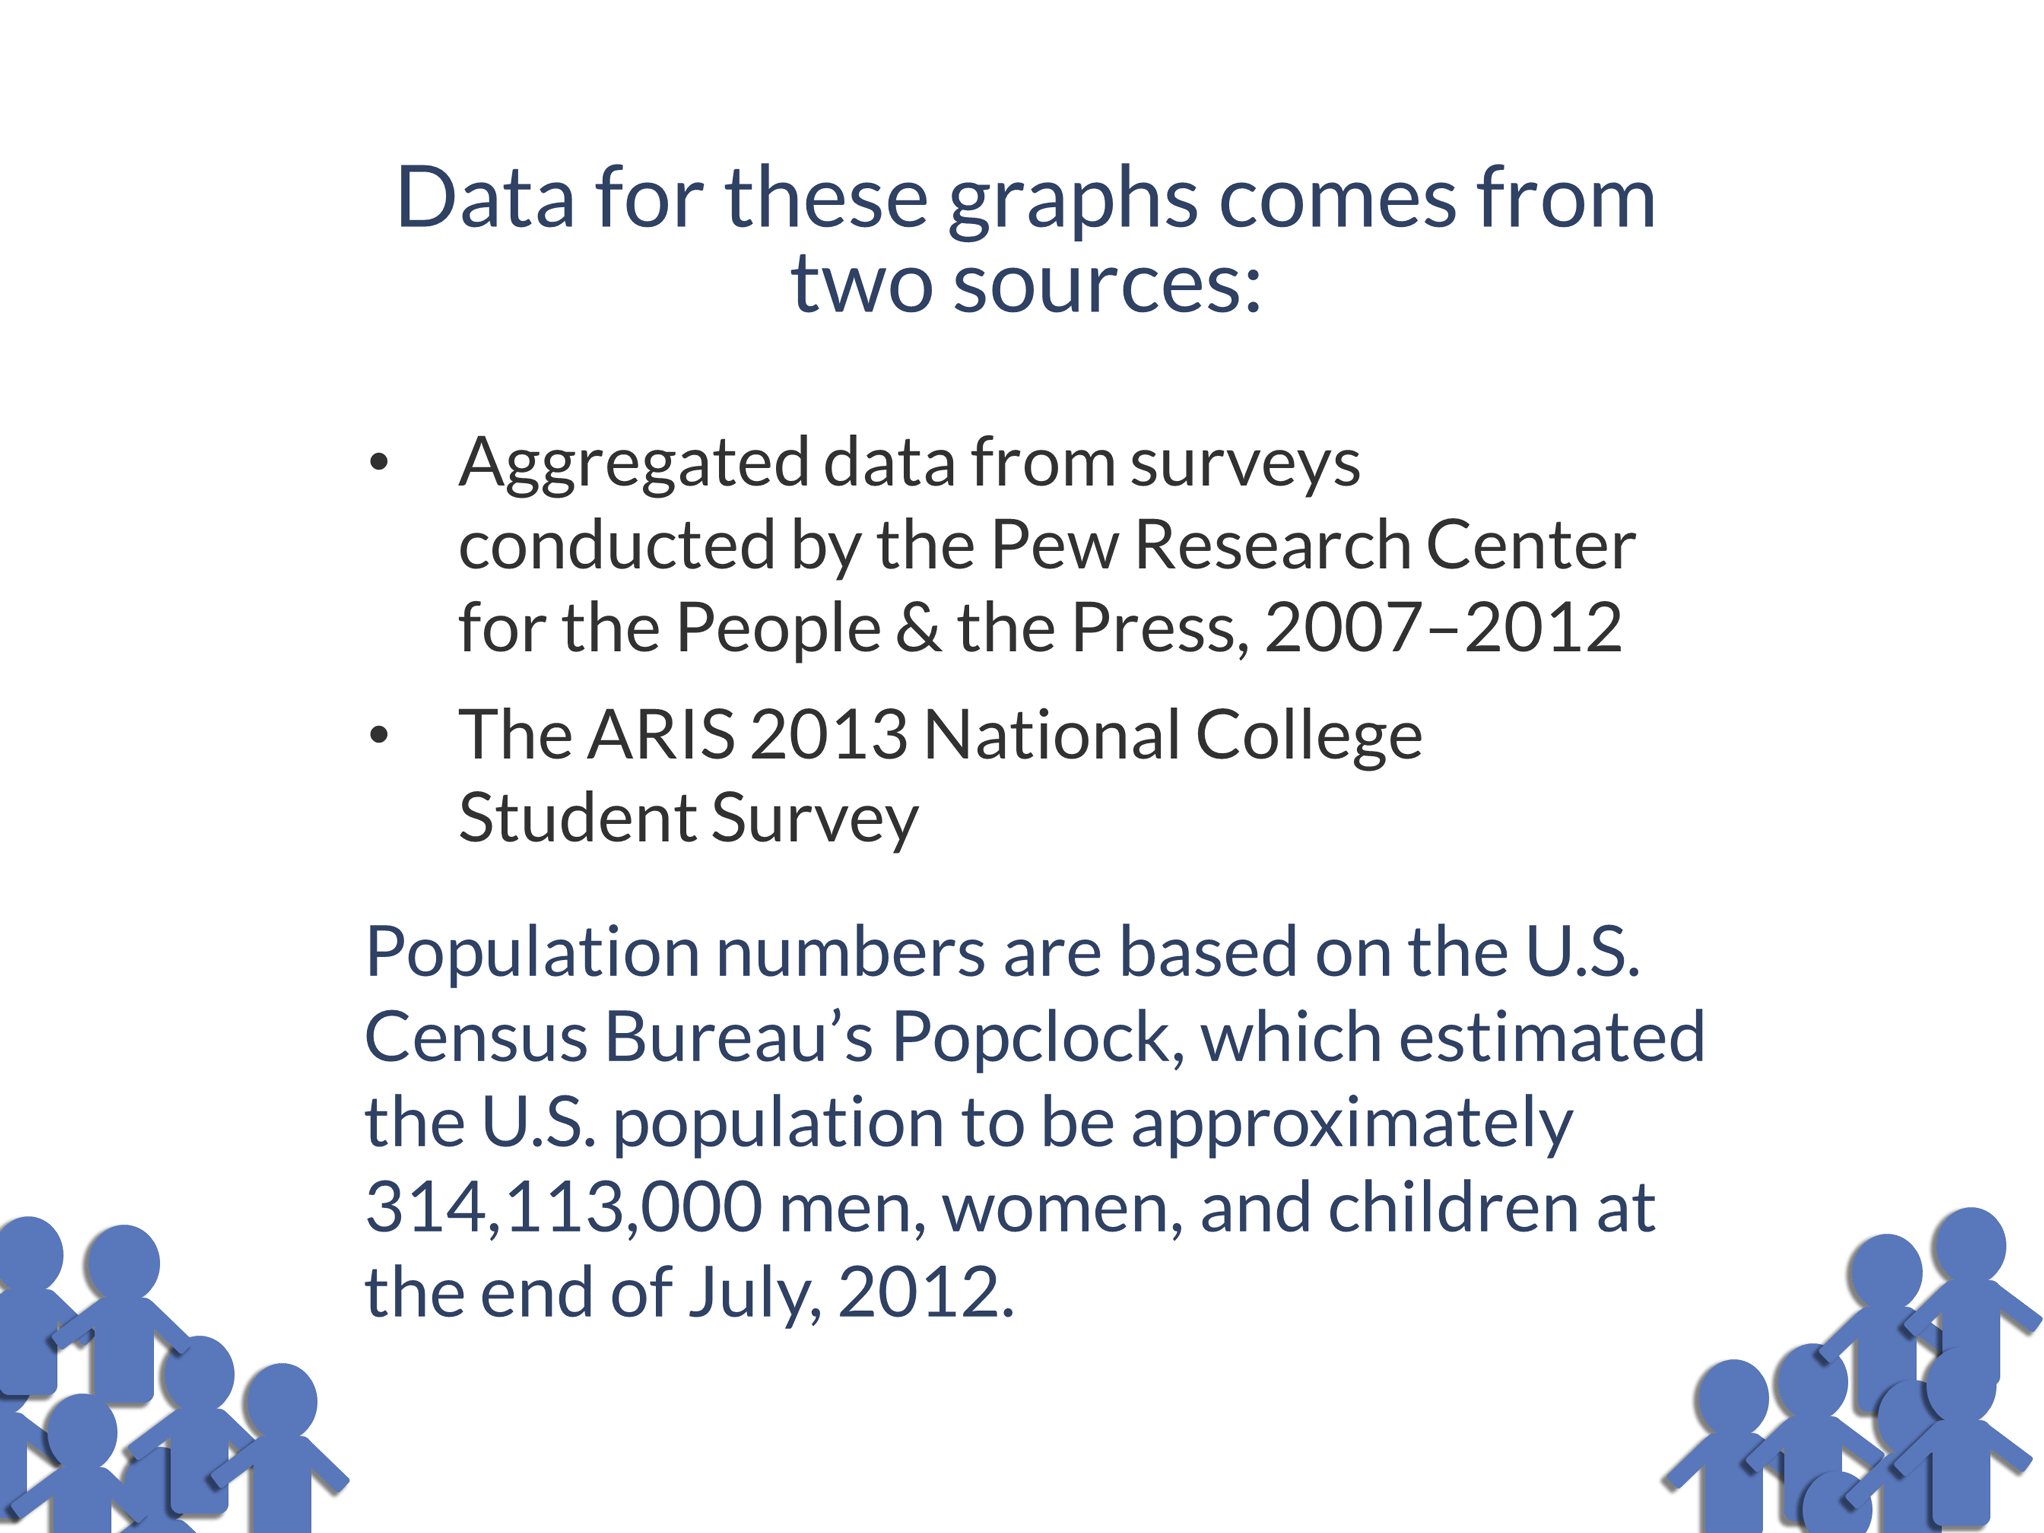 Data for thetse graphs comes from two sources: aggregated data from surveys conducted by the Pew Research Center for the People & the Press, 2007-2012, and the ARIS 2013 National College Student Survey. Population numbers are based on the U.S. Census Bureau's Popclock, which estimated the U.S. population to be approximately 314,113,000 men, women, and children at the end of July, 2012.